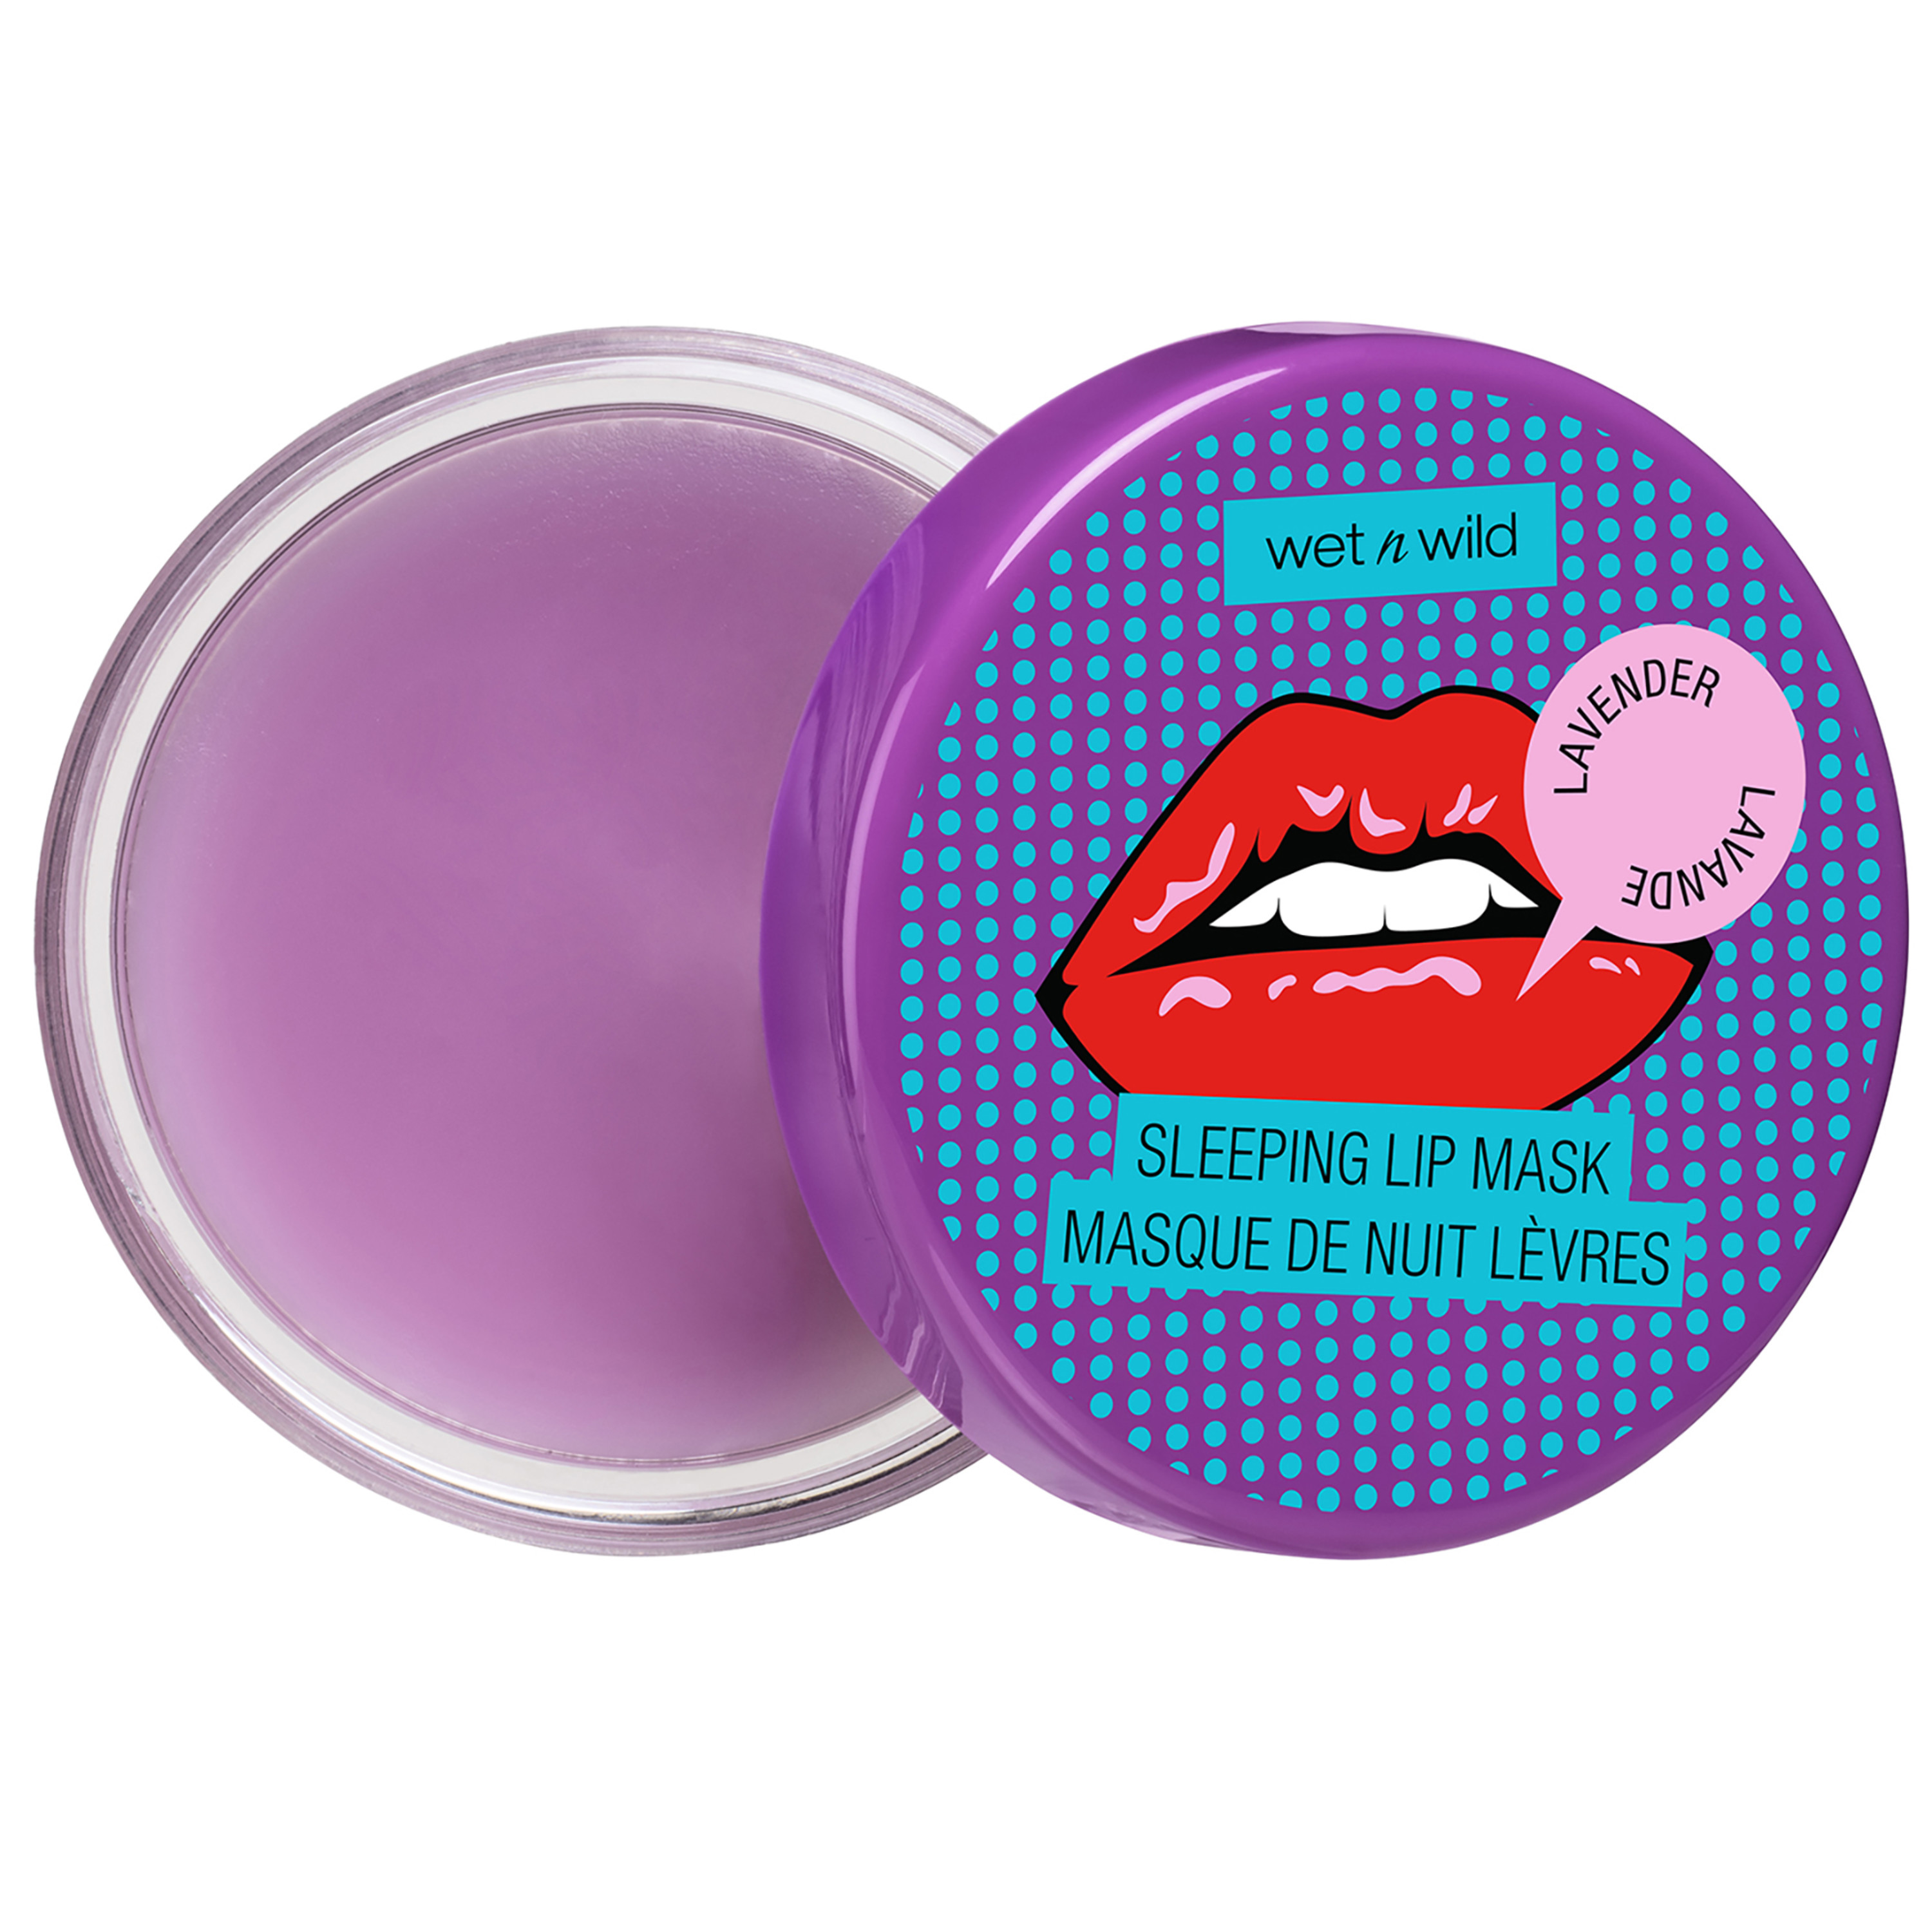 wet n wild Perfect Pout Sleeping Lip Mask, Lavender - image 1 of 8